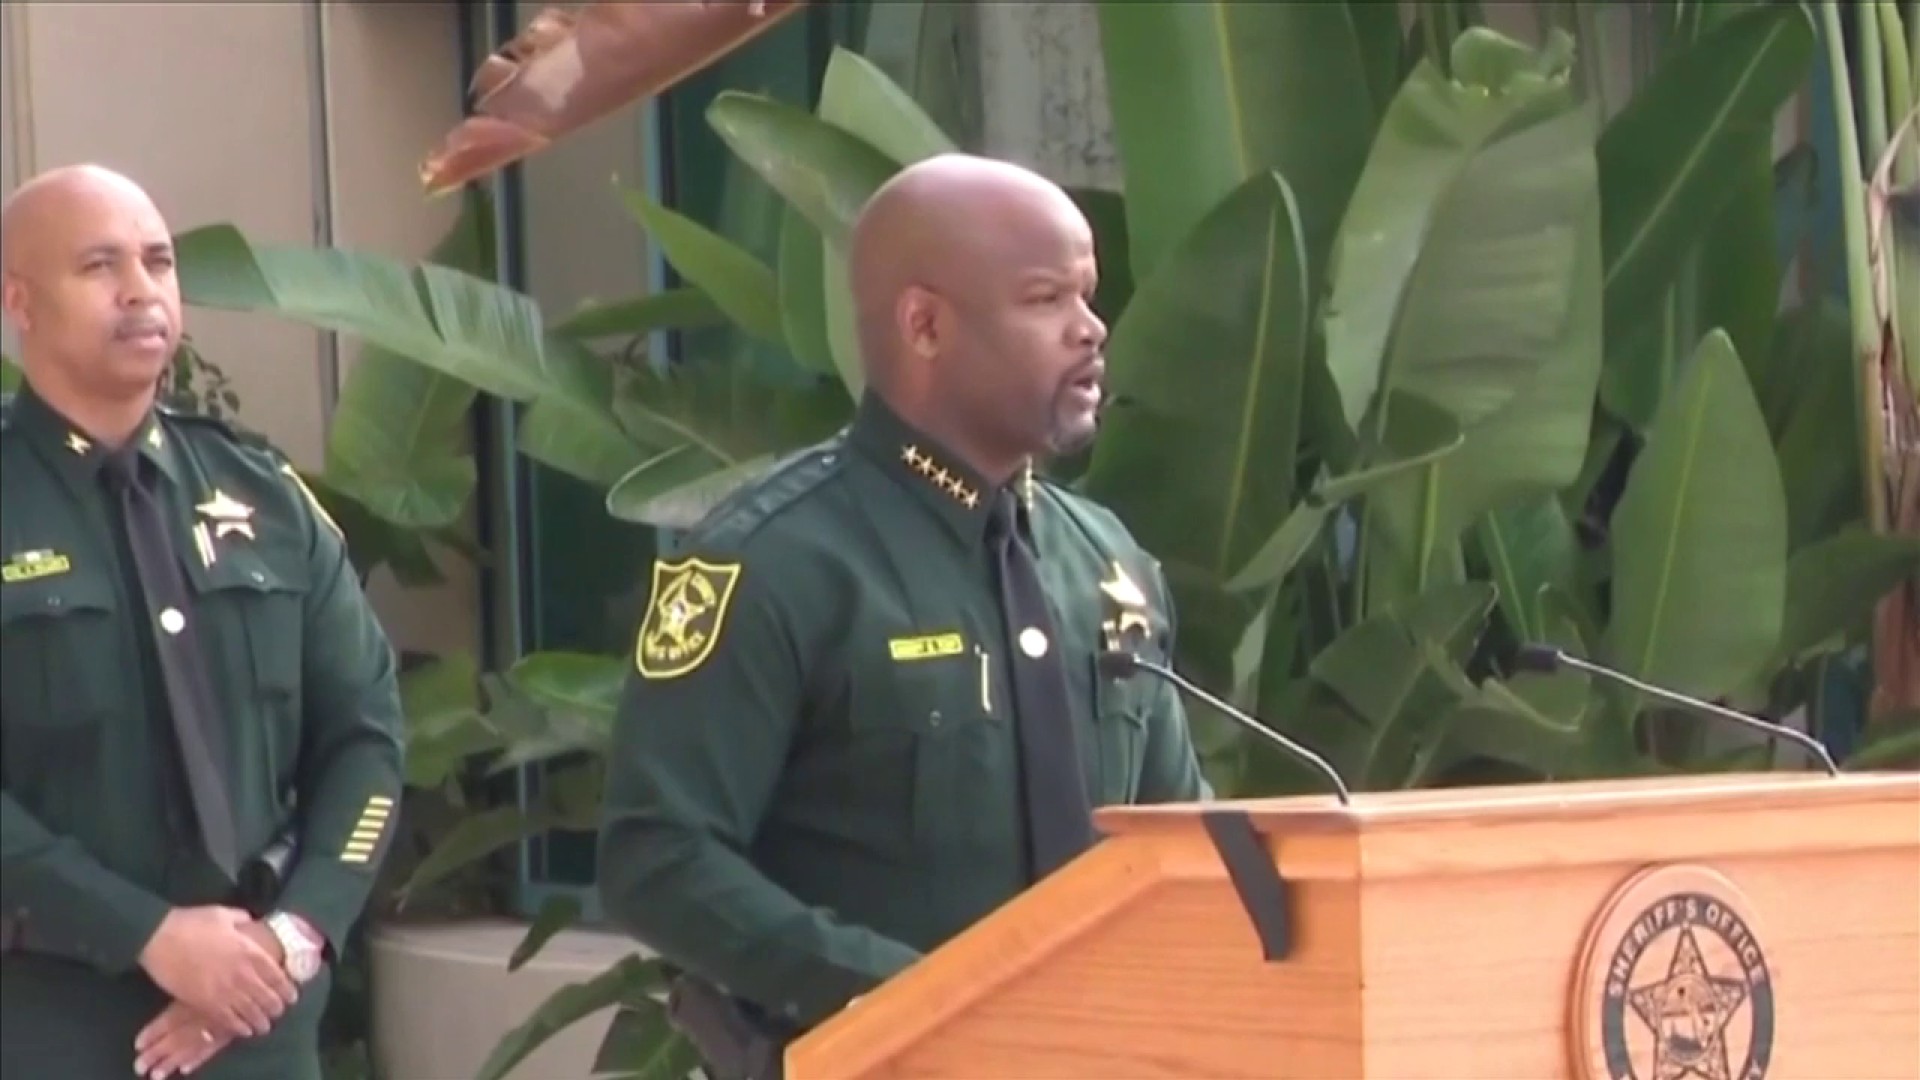 Broward Sheriff Gregory Tony's campaign says form was filled out correctly